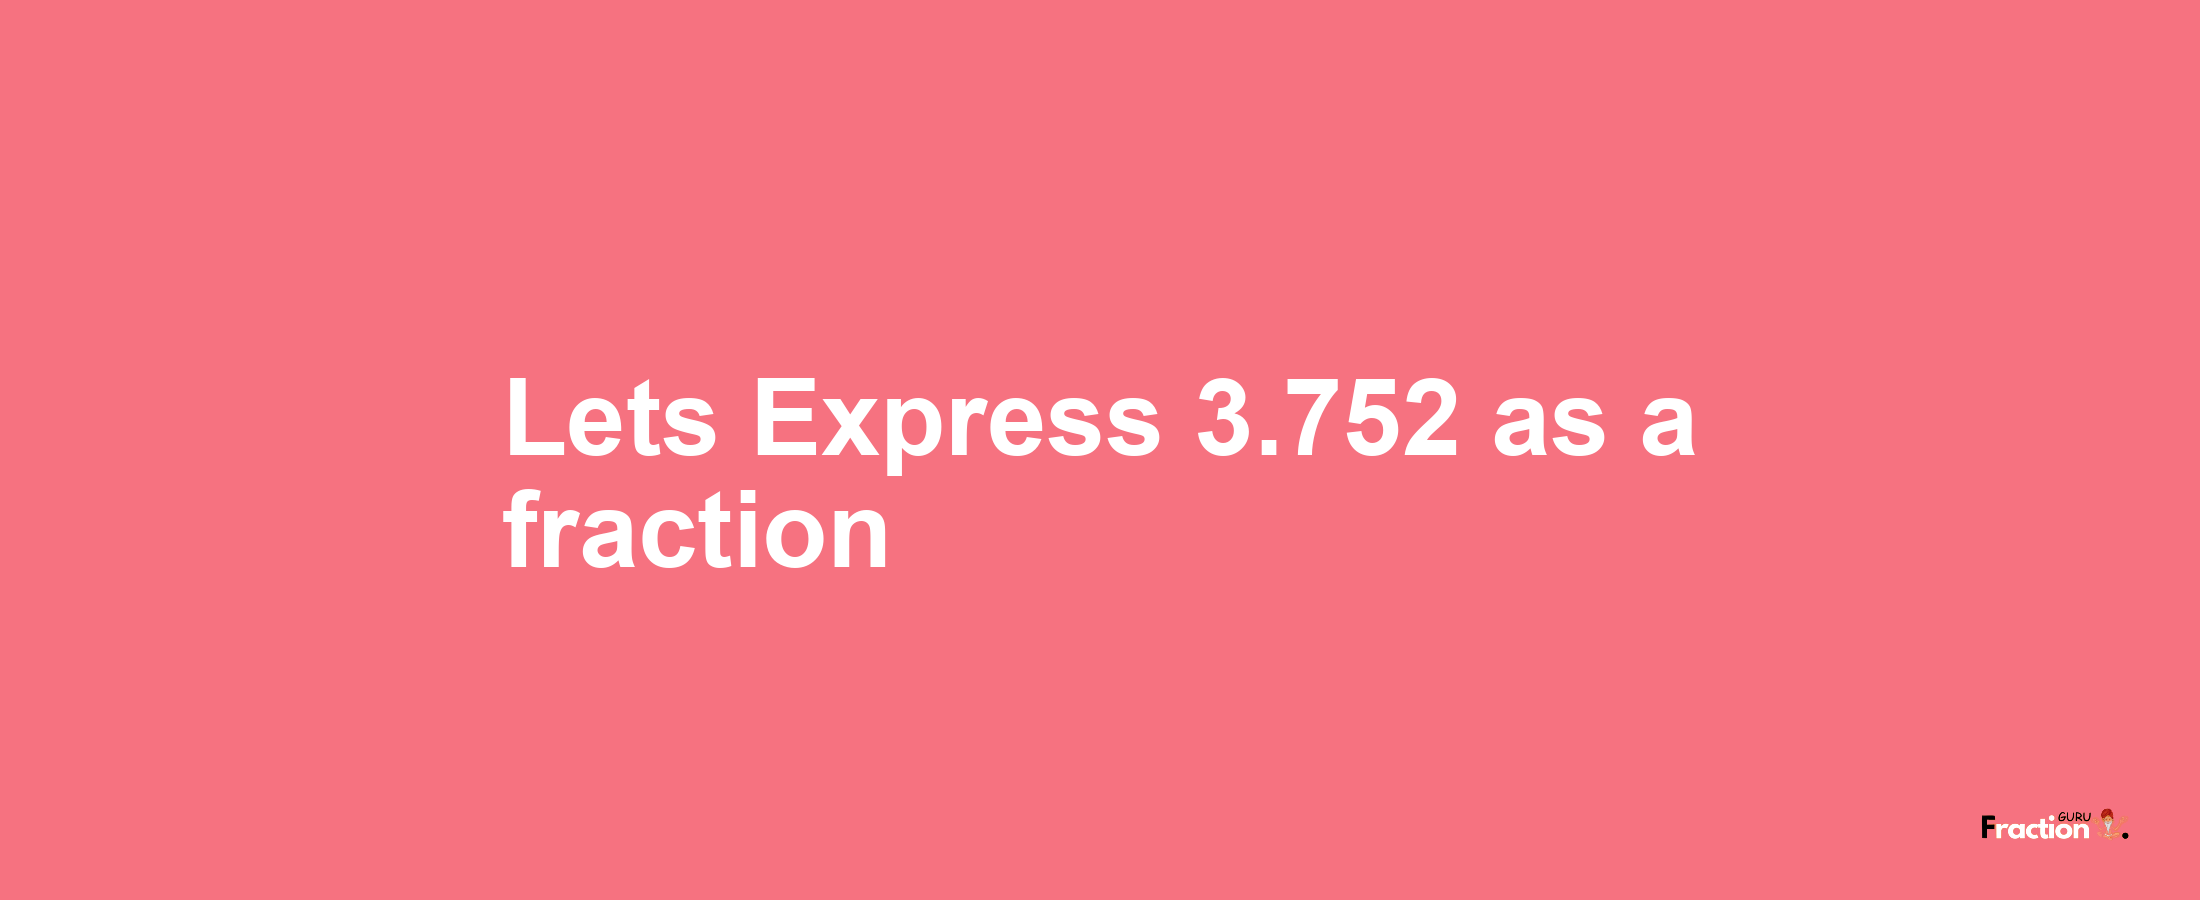 Lets Express 3.752 as afraction